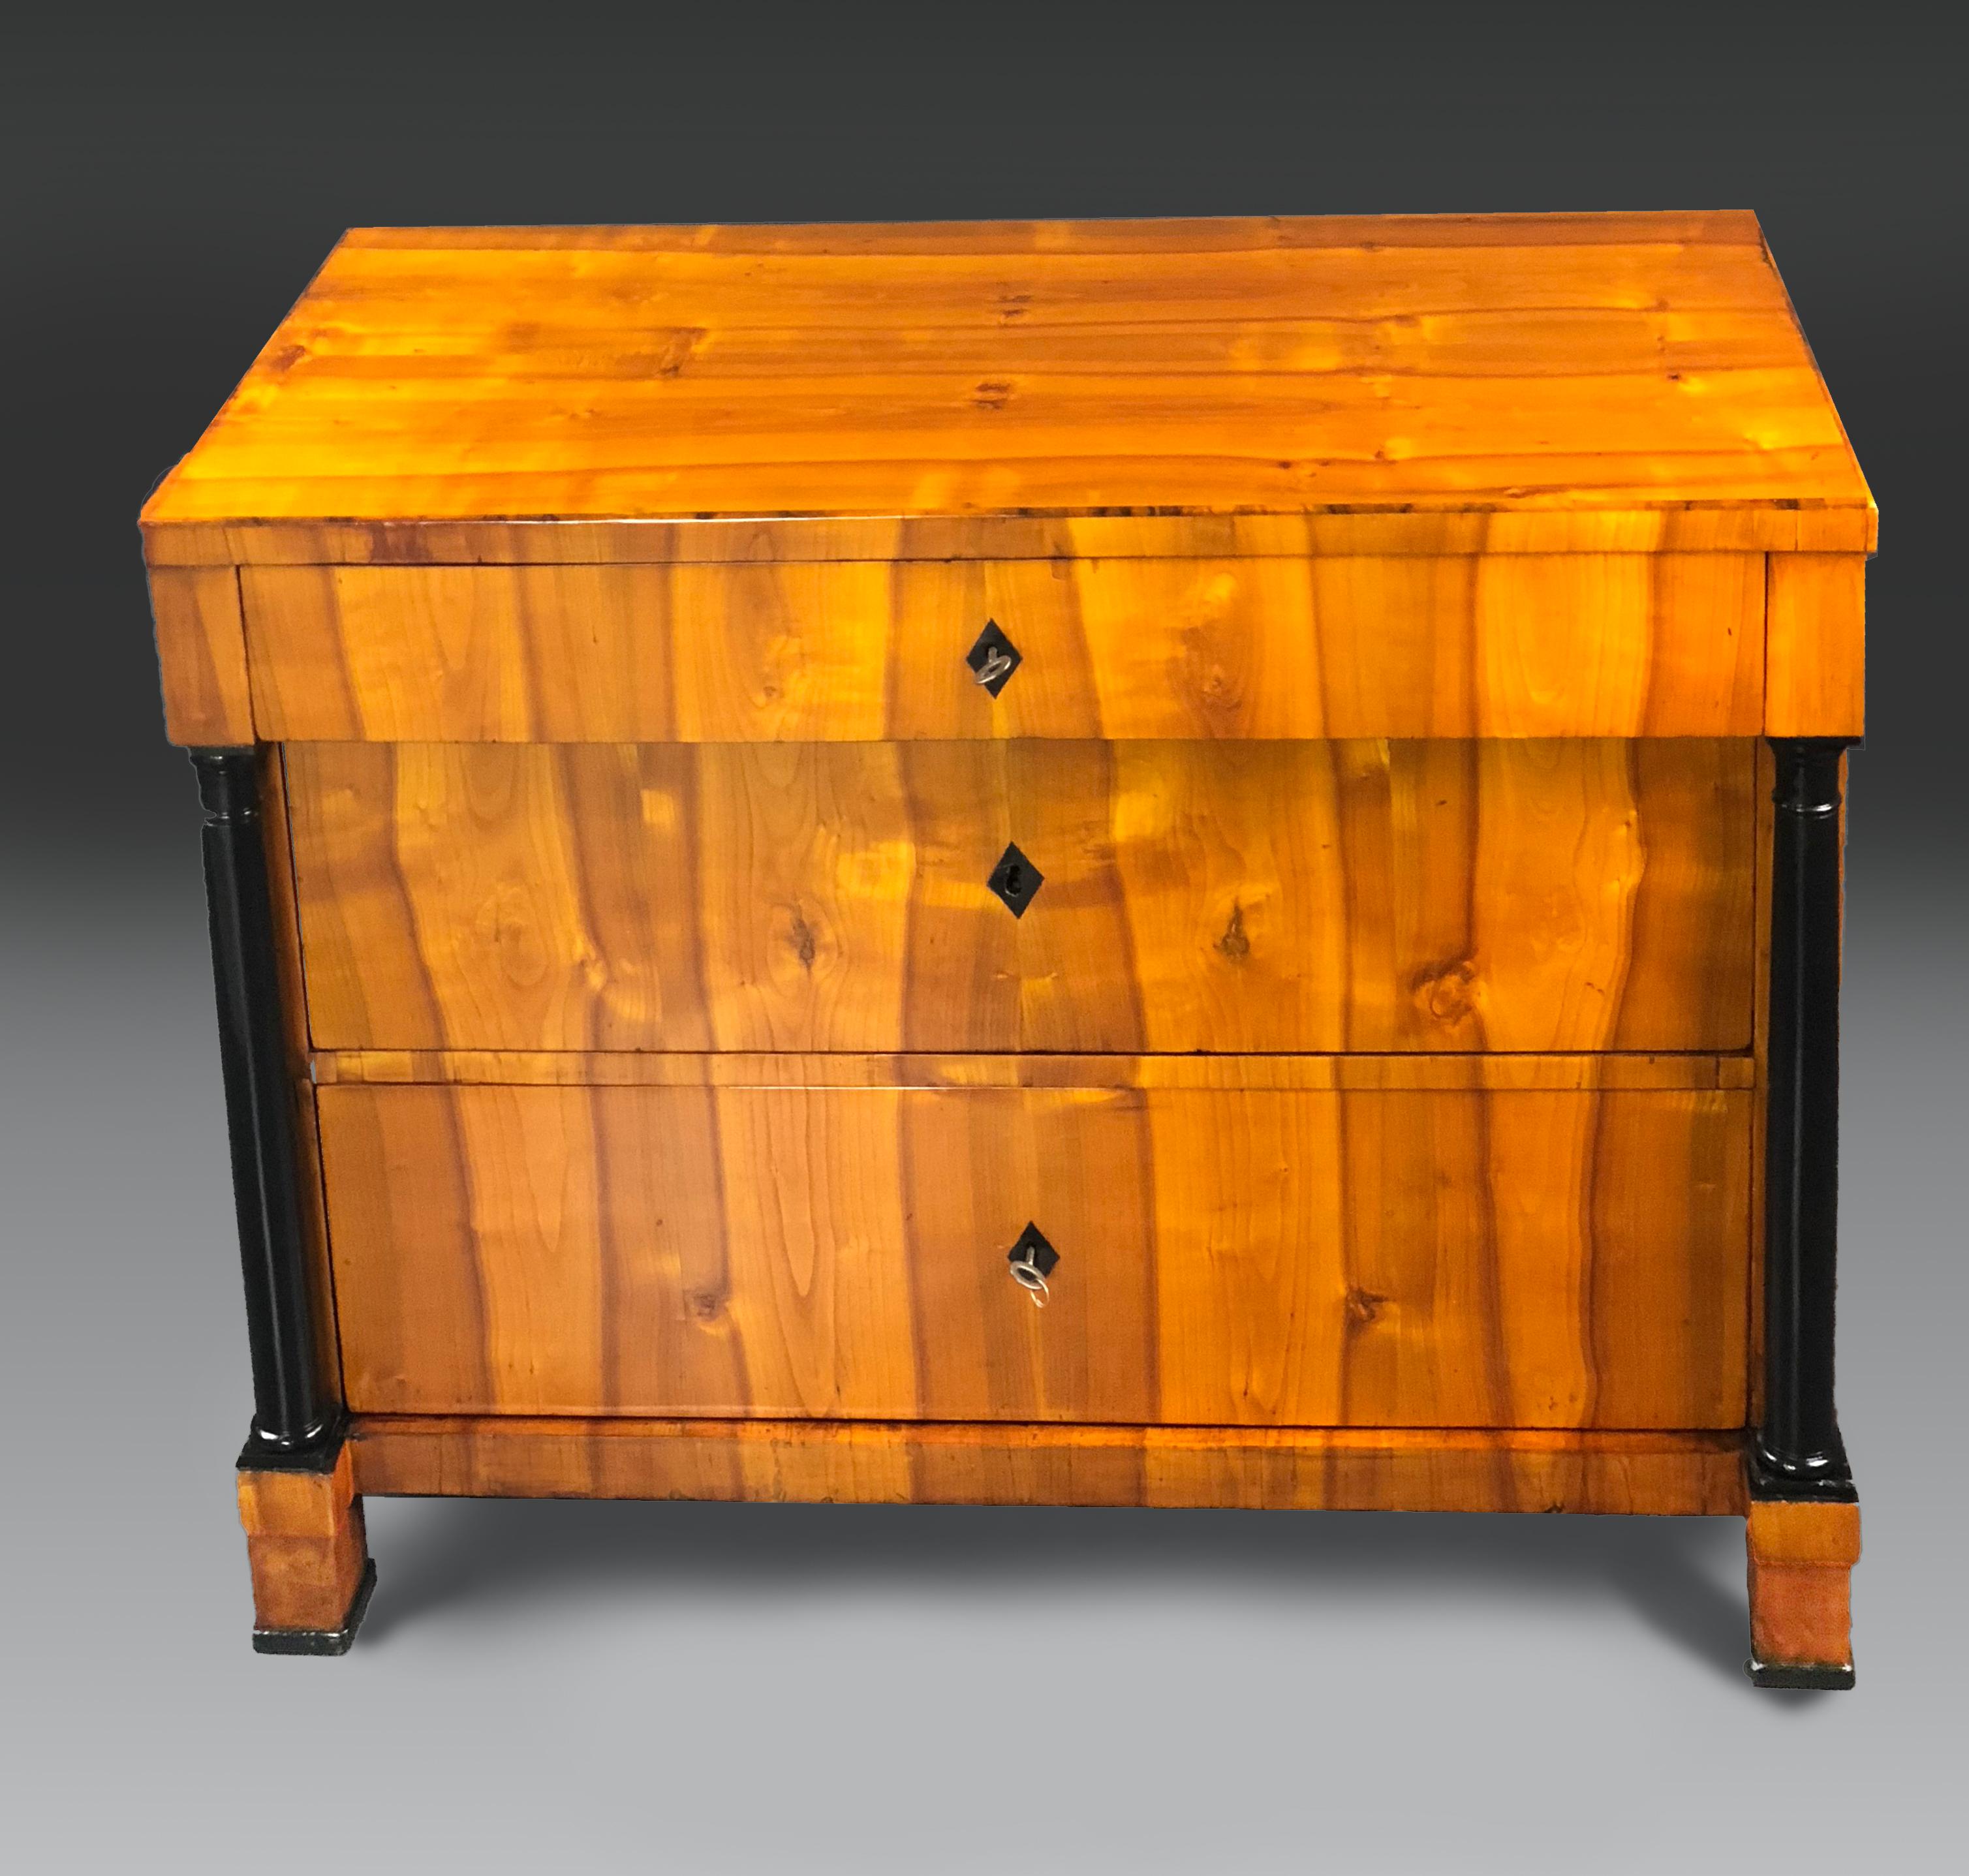 Early 19th century Biedermeier commode with beautifully matched cherrywood veneers of Swedish origin. One small drawer above 2 large ones flanked by black lacquered Doric style columns. All drawers have rhomboid shaped buffalo Horn keyhole